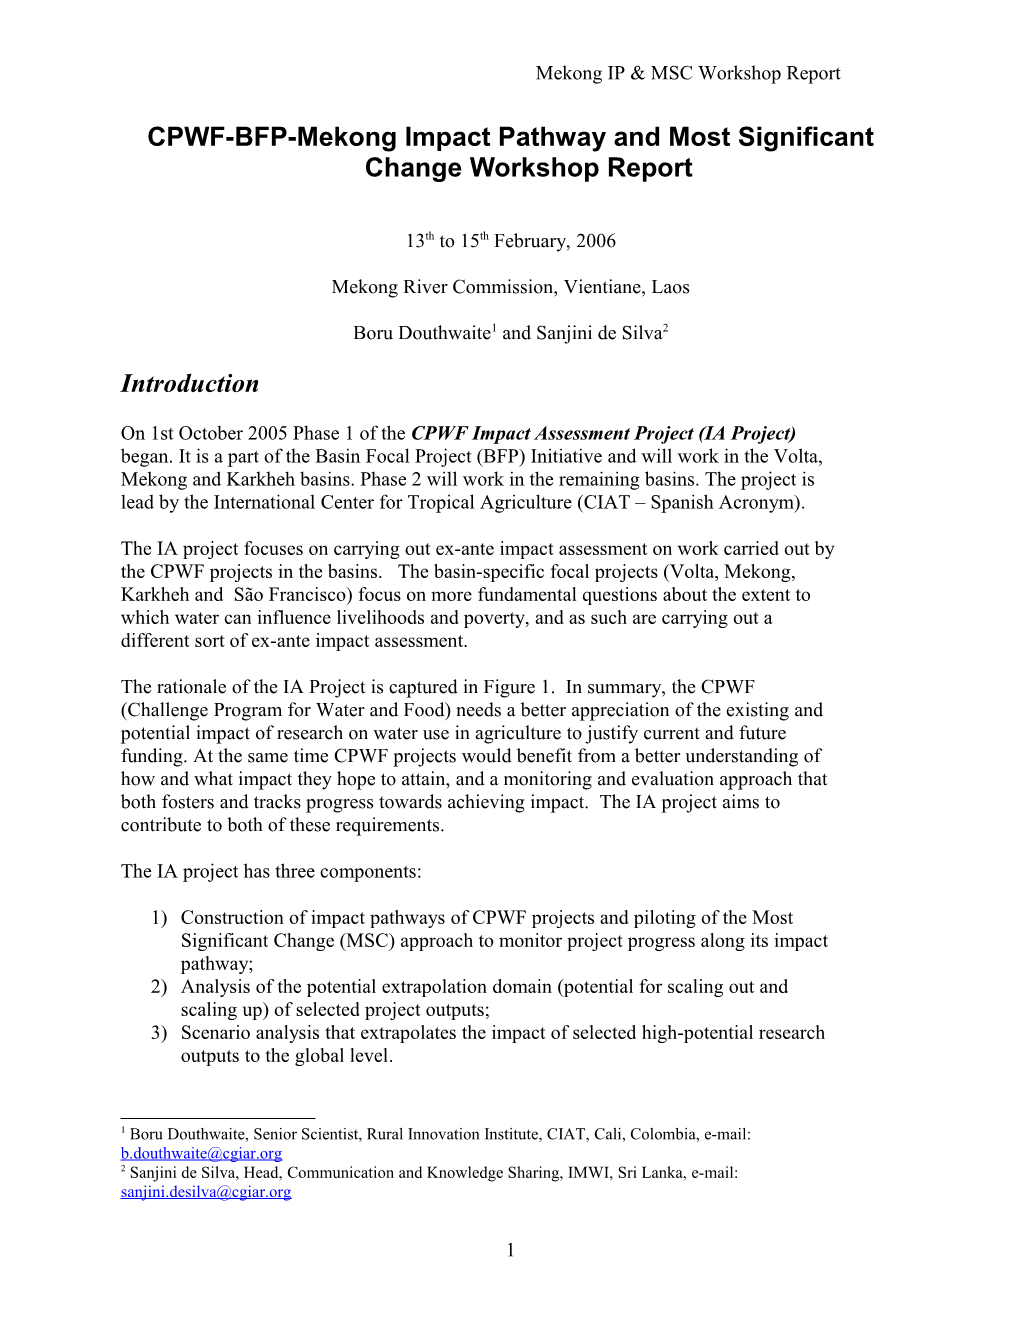 CPWF-BFP-Volta Impact Pathway and Most Significant Change Workshop